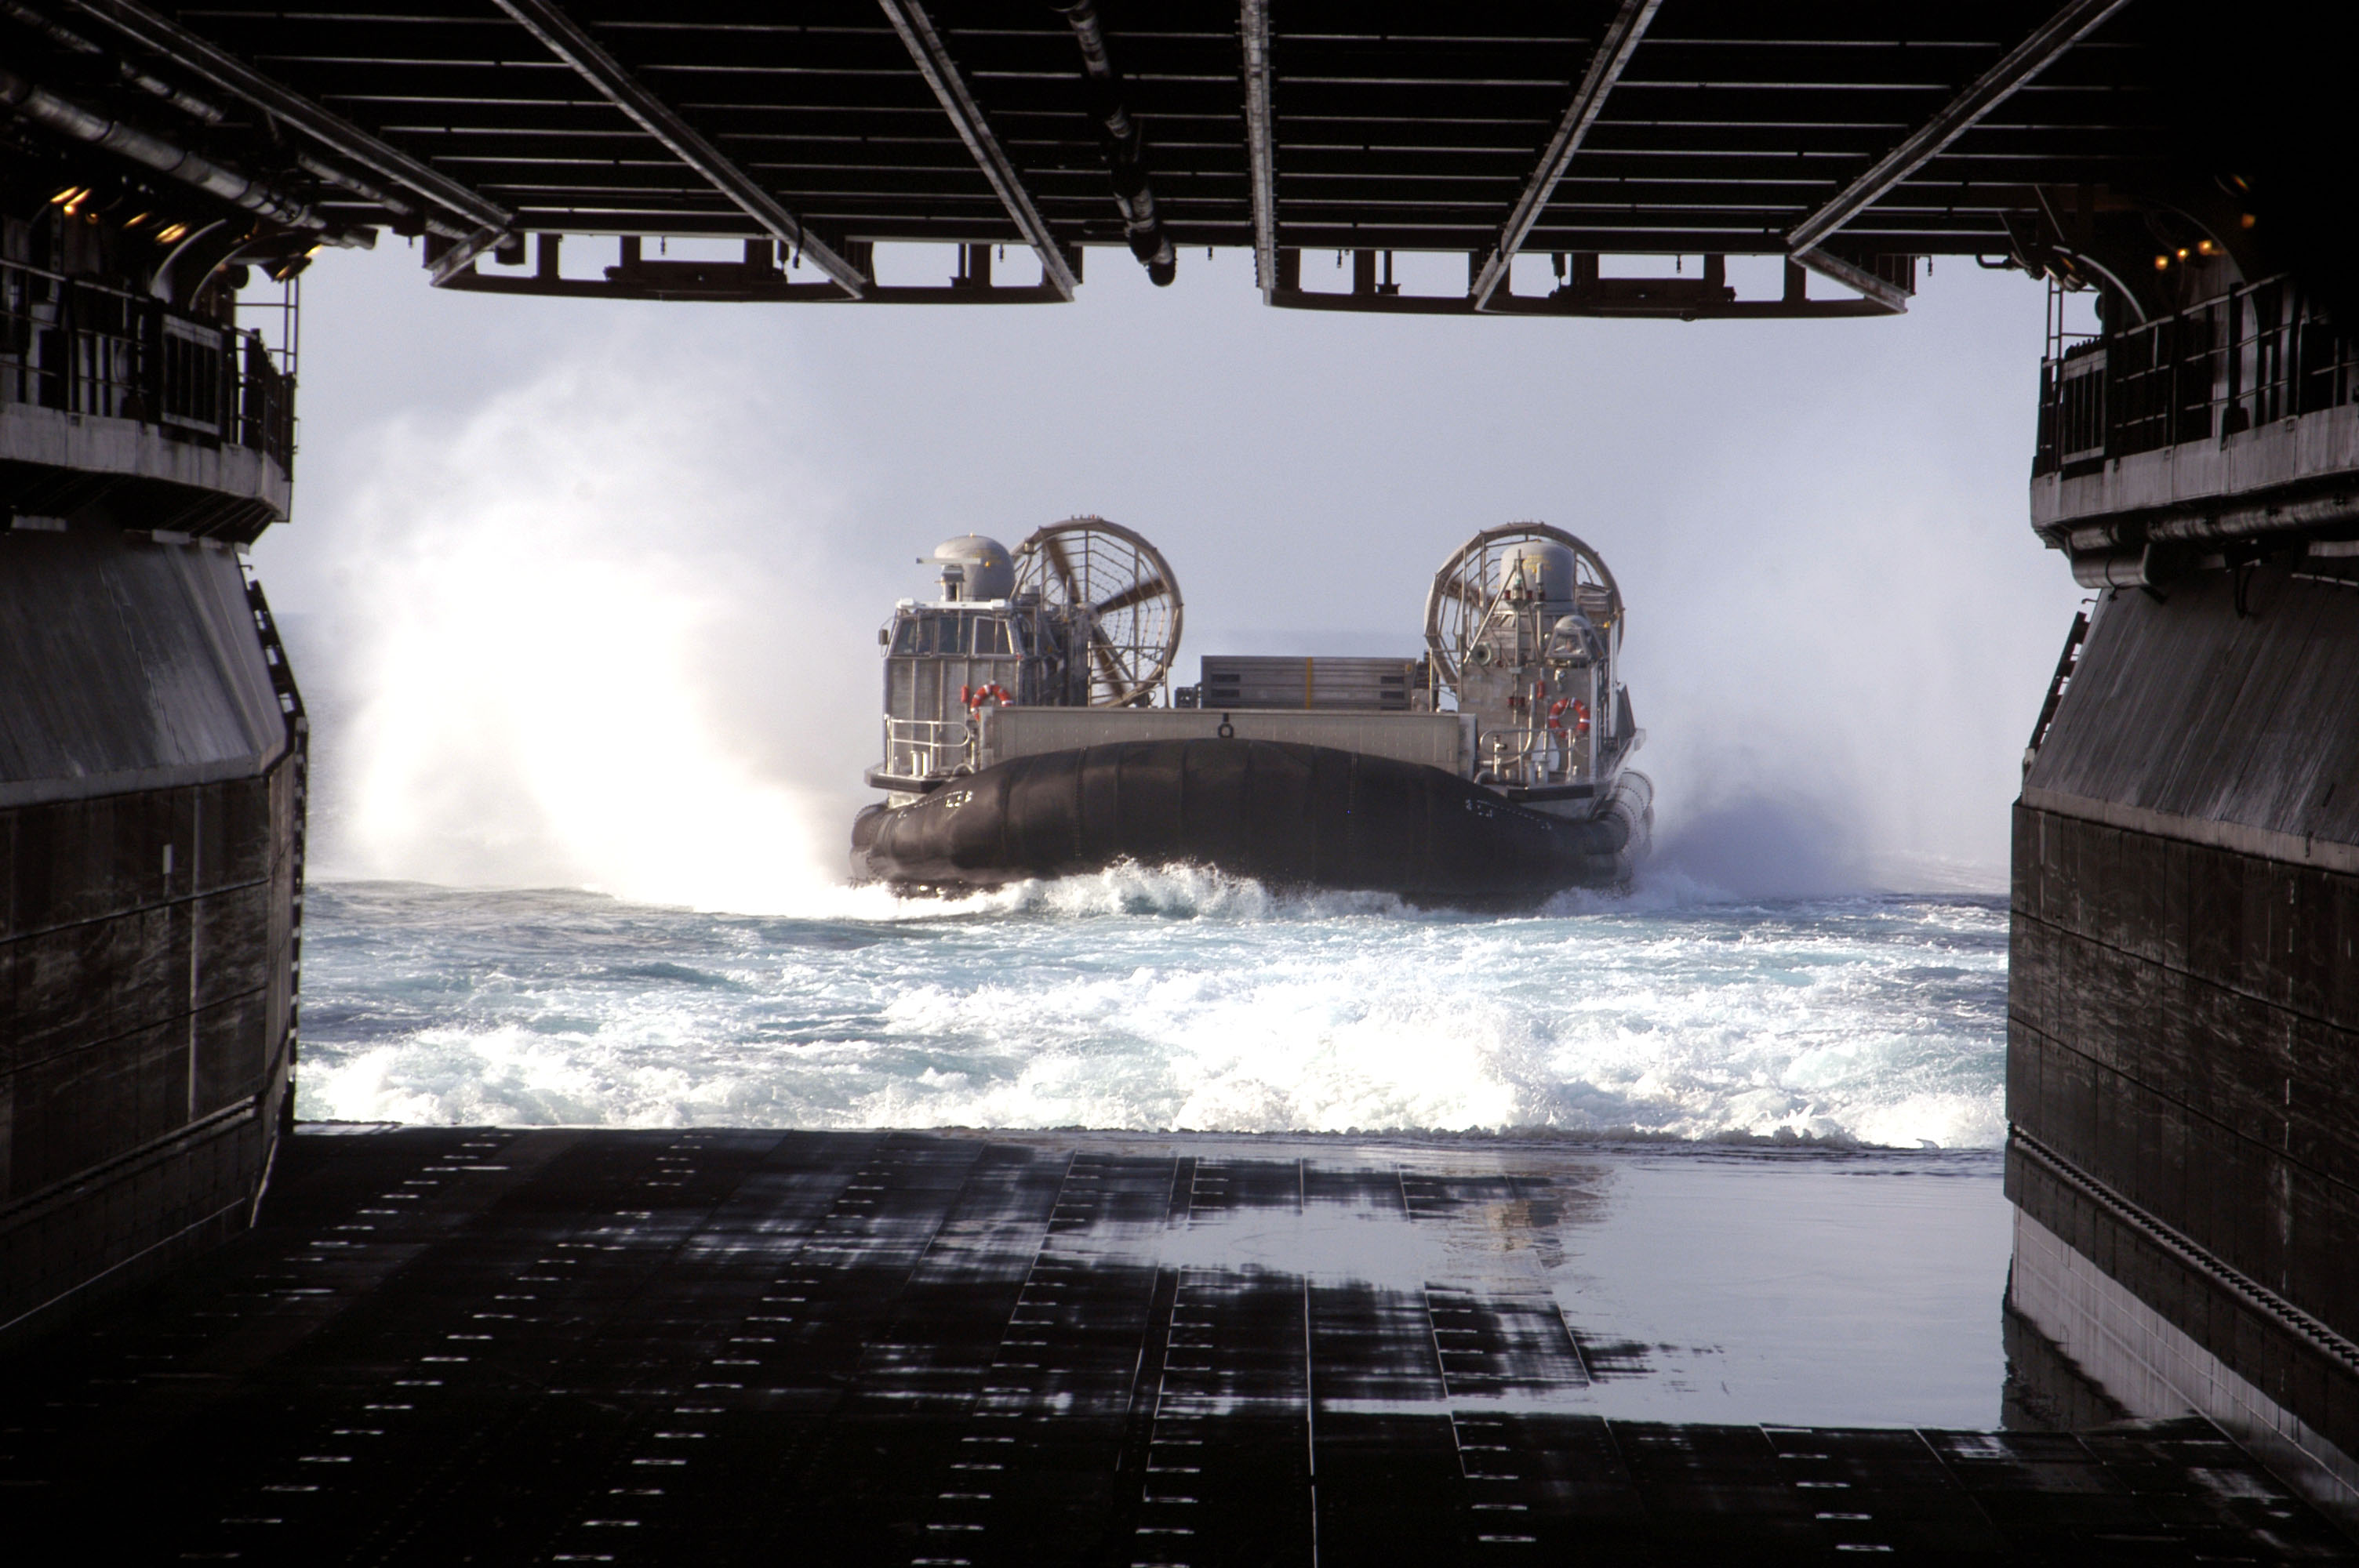 https://upload.wikimedia.org/wikipedia/commons/a/a8/US_Navy_050831-N-1467R-062_A_Landing_Craft_Air_Cushion_%28LCAC%29_assigned_to_Naval_Surface_Warfare_Center%2C_Panama_City%2C_Fla.%2C_approaches_the_stern_gate_of_the_amphibious_assault_ship_USS_Bataan_%28LHD_5%29.jpg